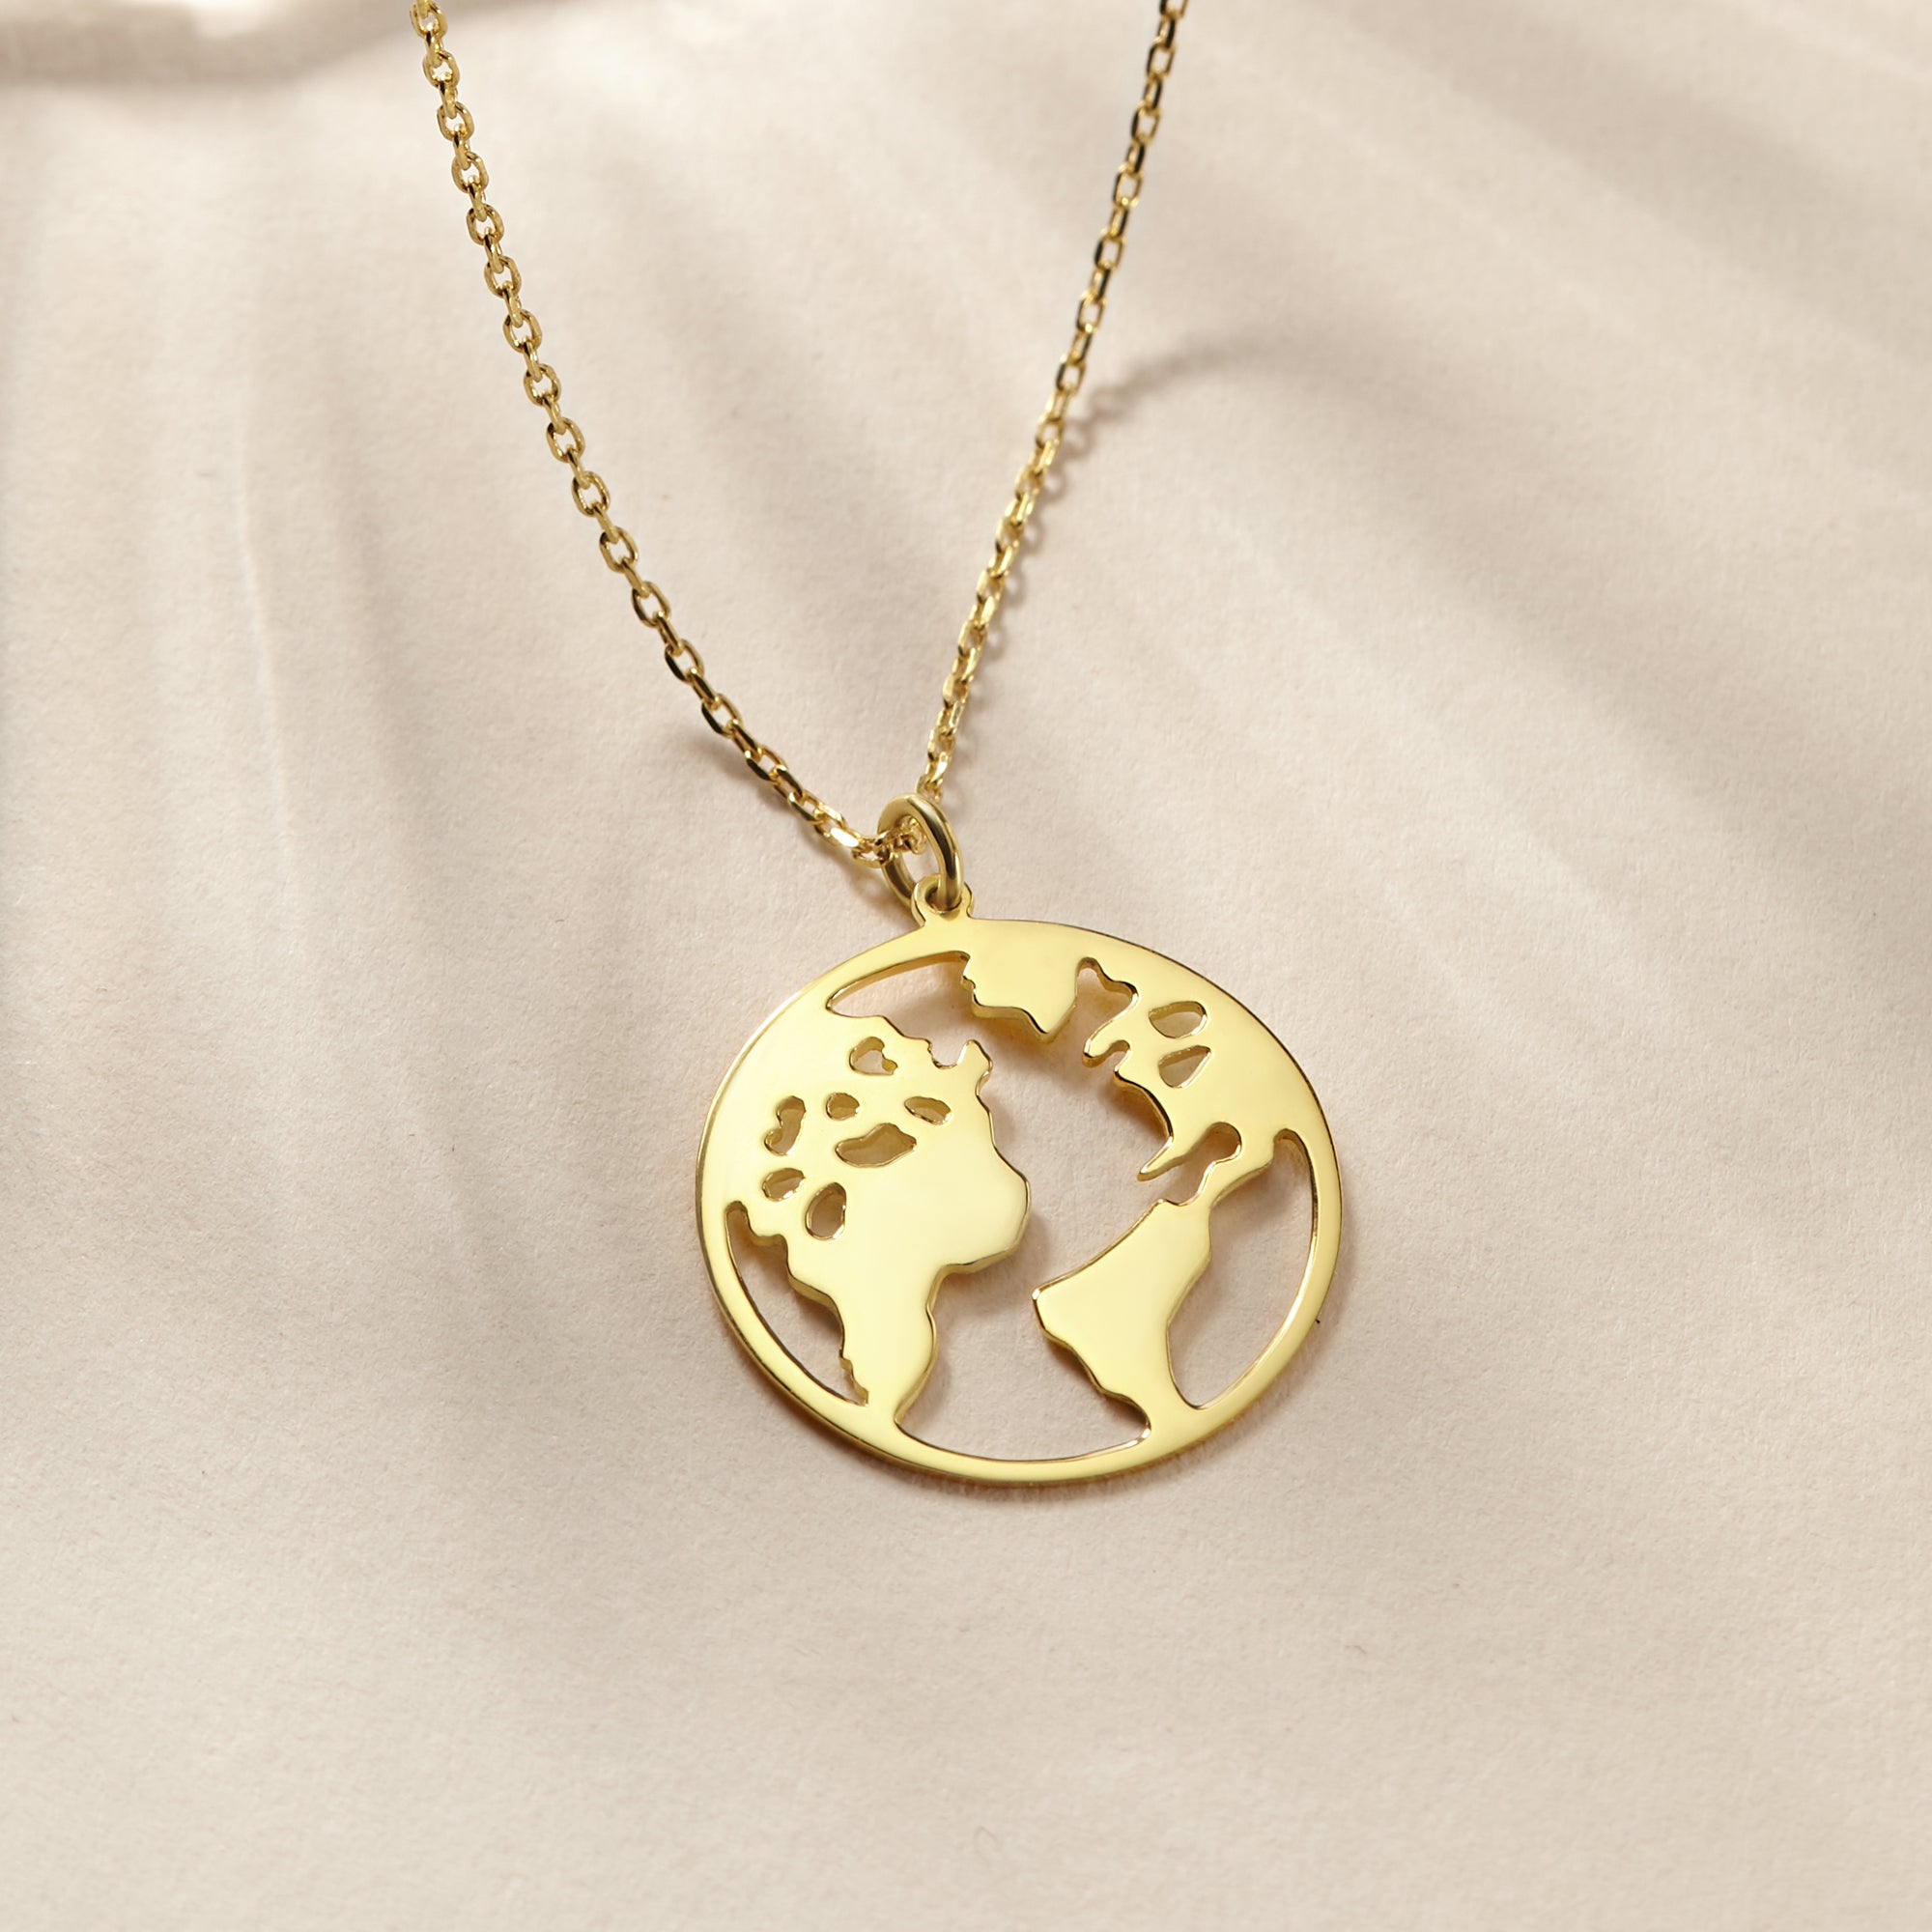 Gold Plated World Map Necklace - 925 Sterling Silver, 18" Chain, Beautiful Packaging - Necklaces - Bijou Her -  -  - 